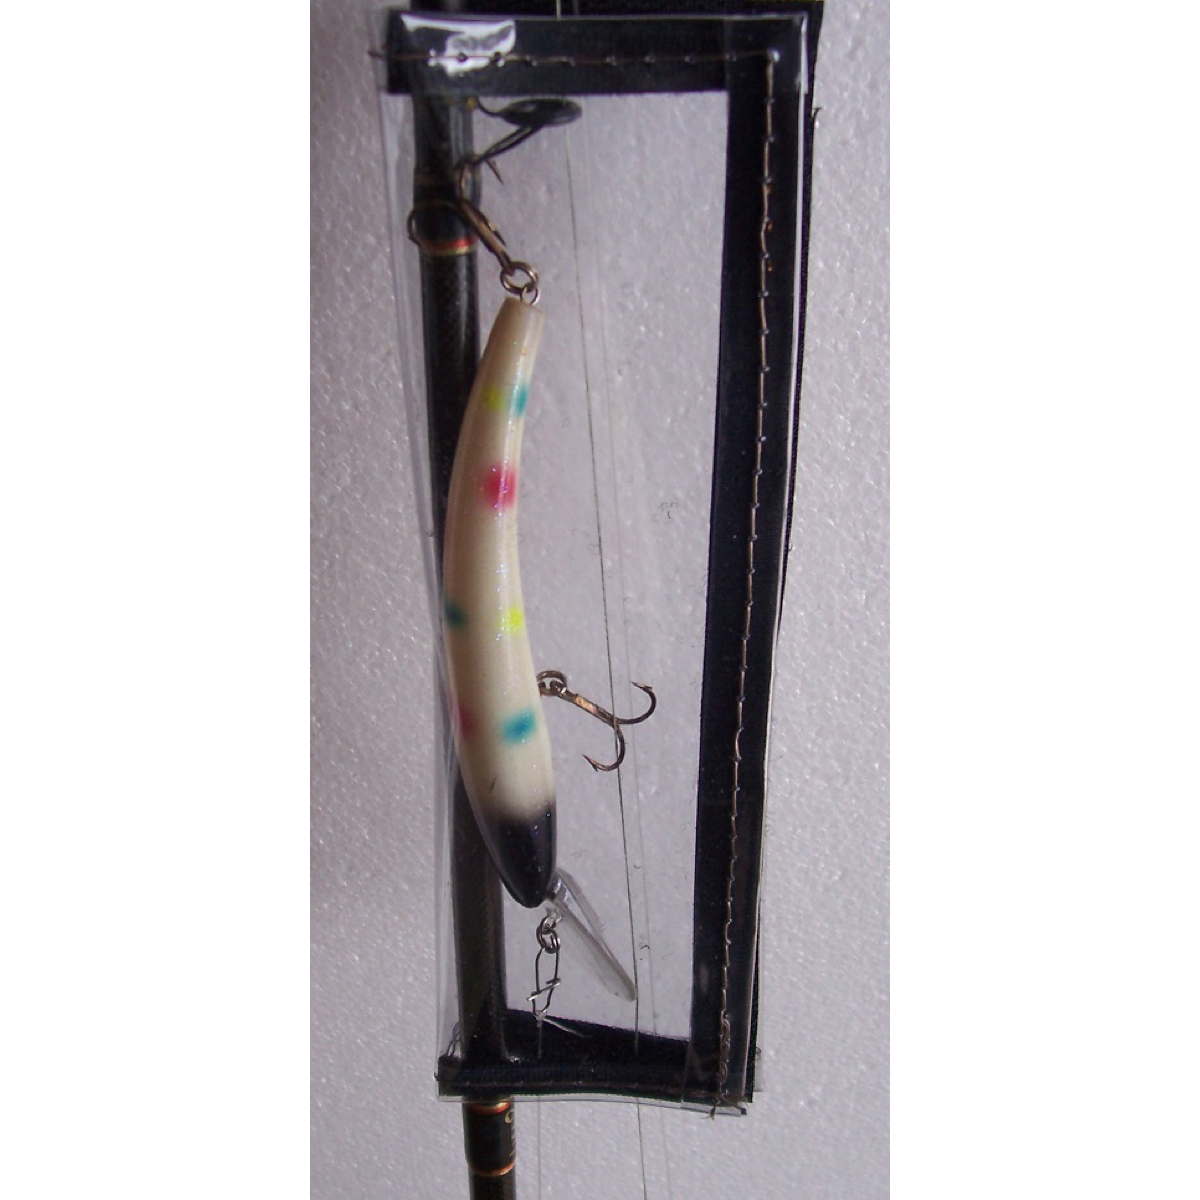 Photo of Amish Outfitters Clear Lure Wrap for sale at United Tackle Shops.